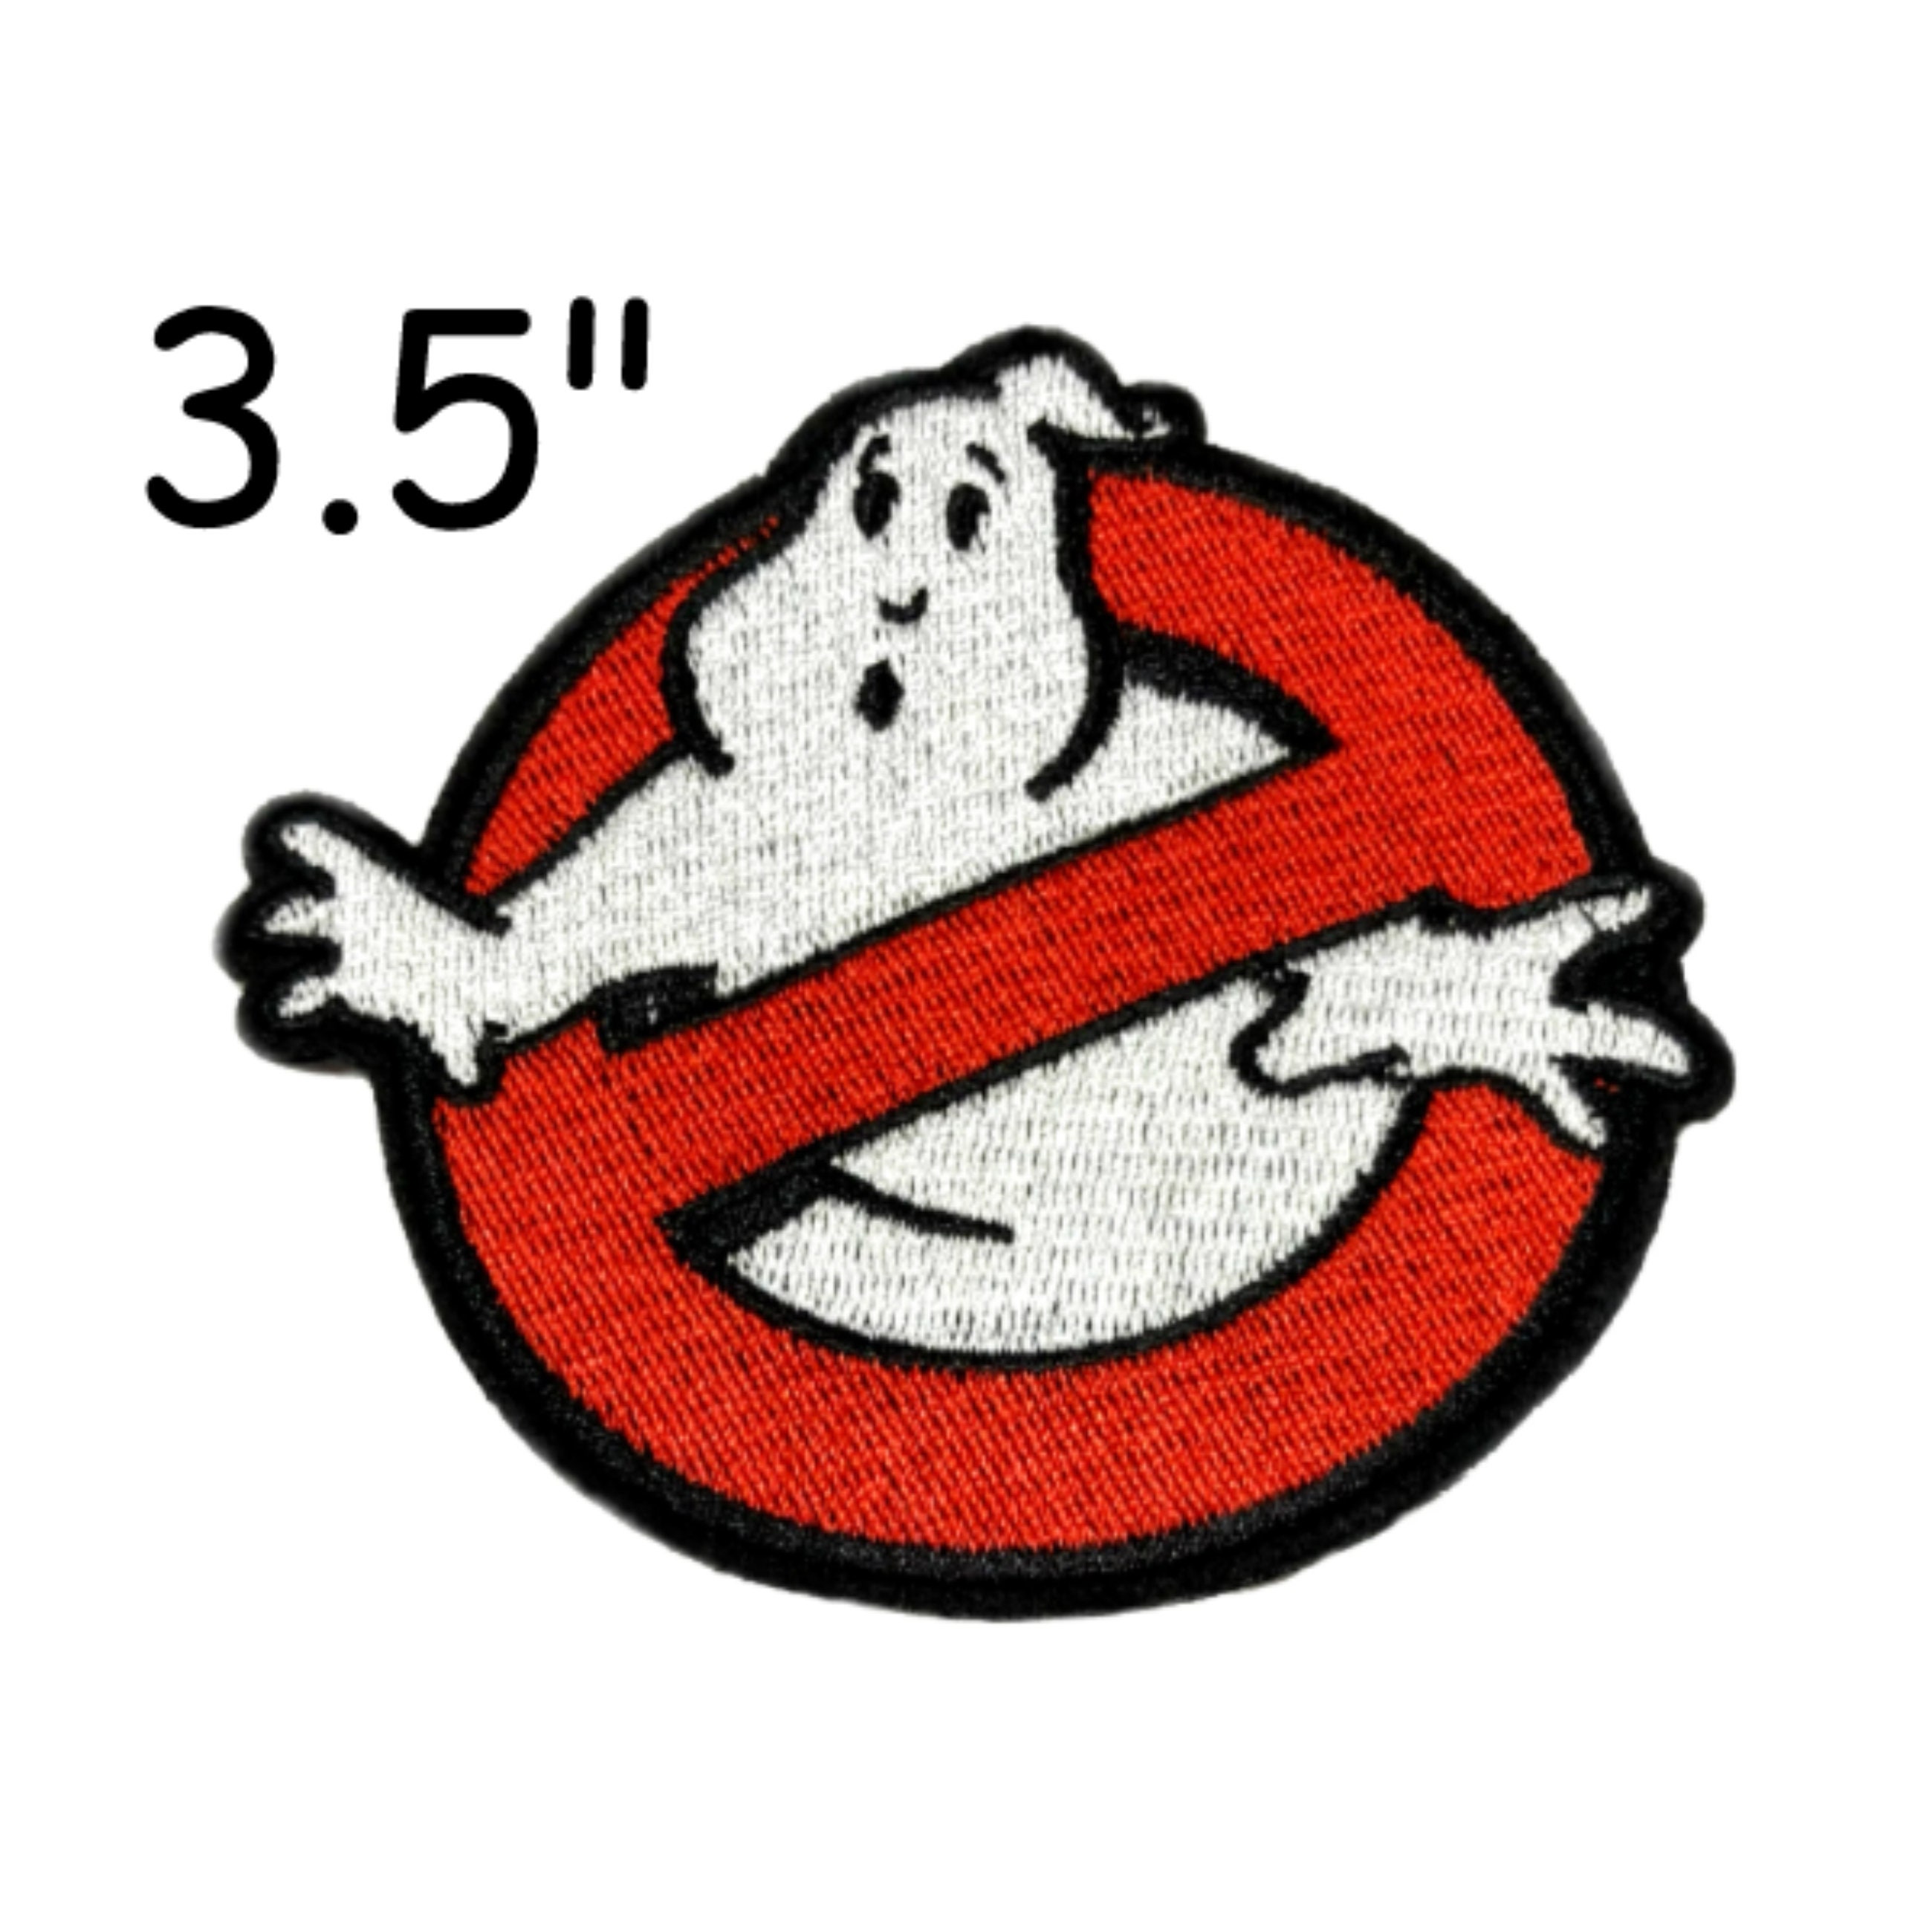 Ghostbusters No Ghost Logo Patch Embroidered DIY Iron-on